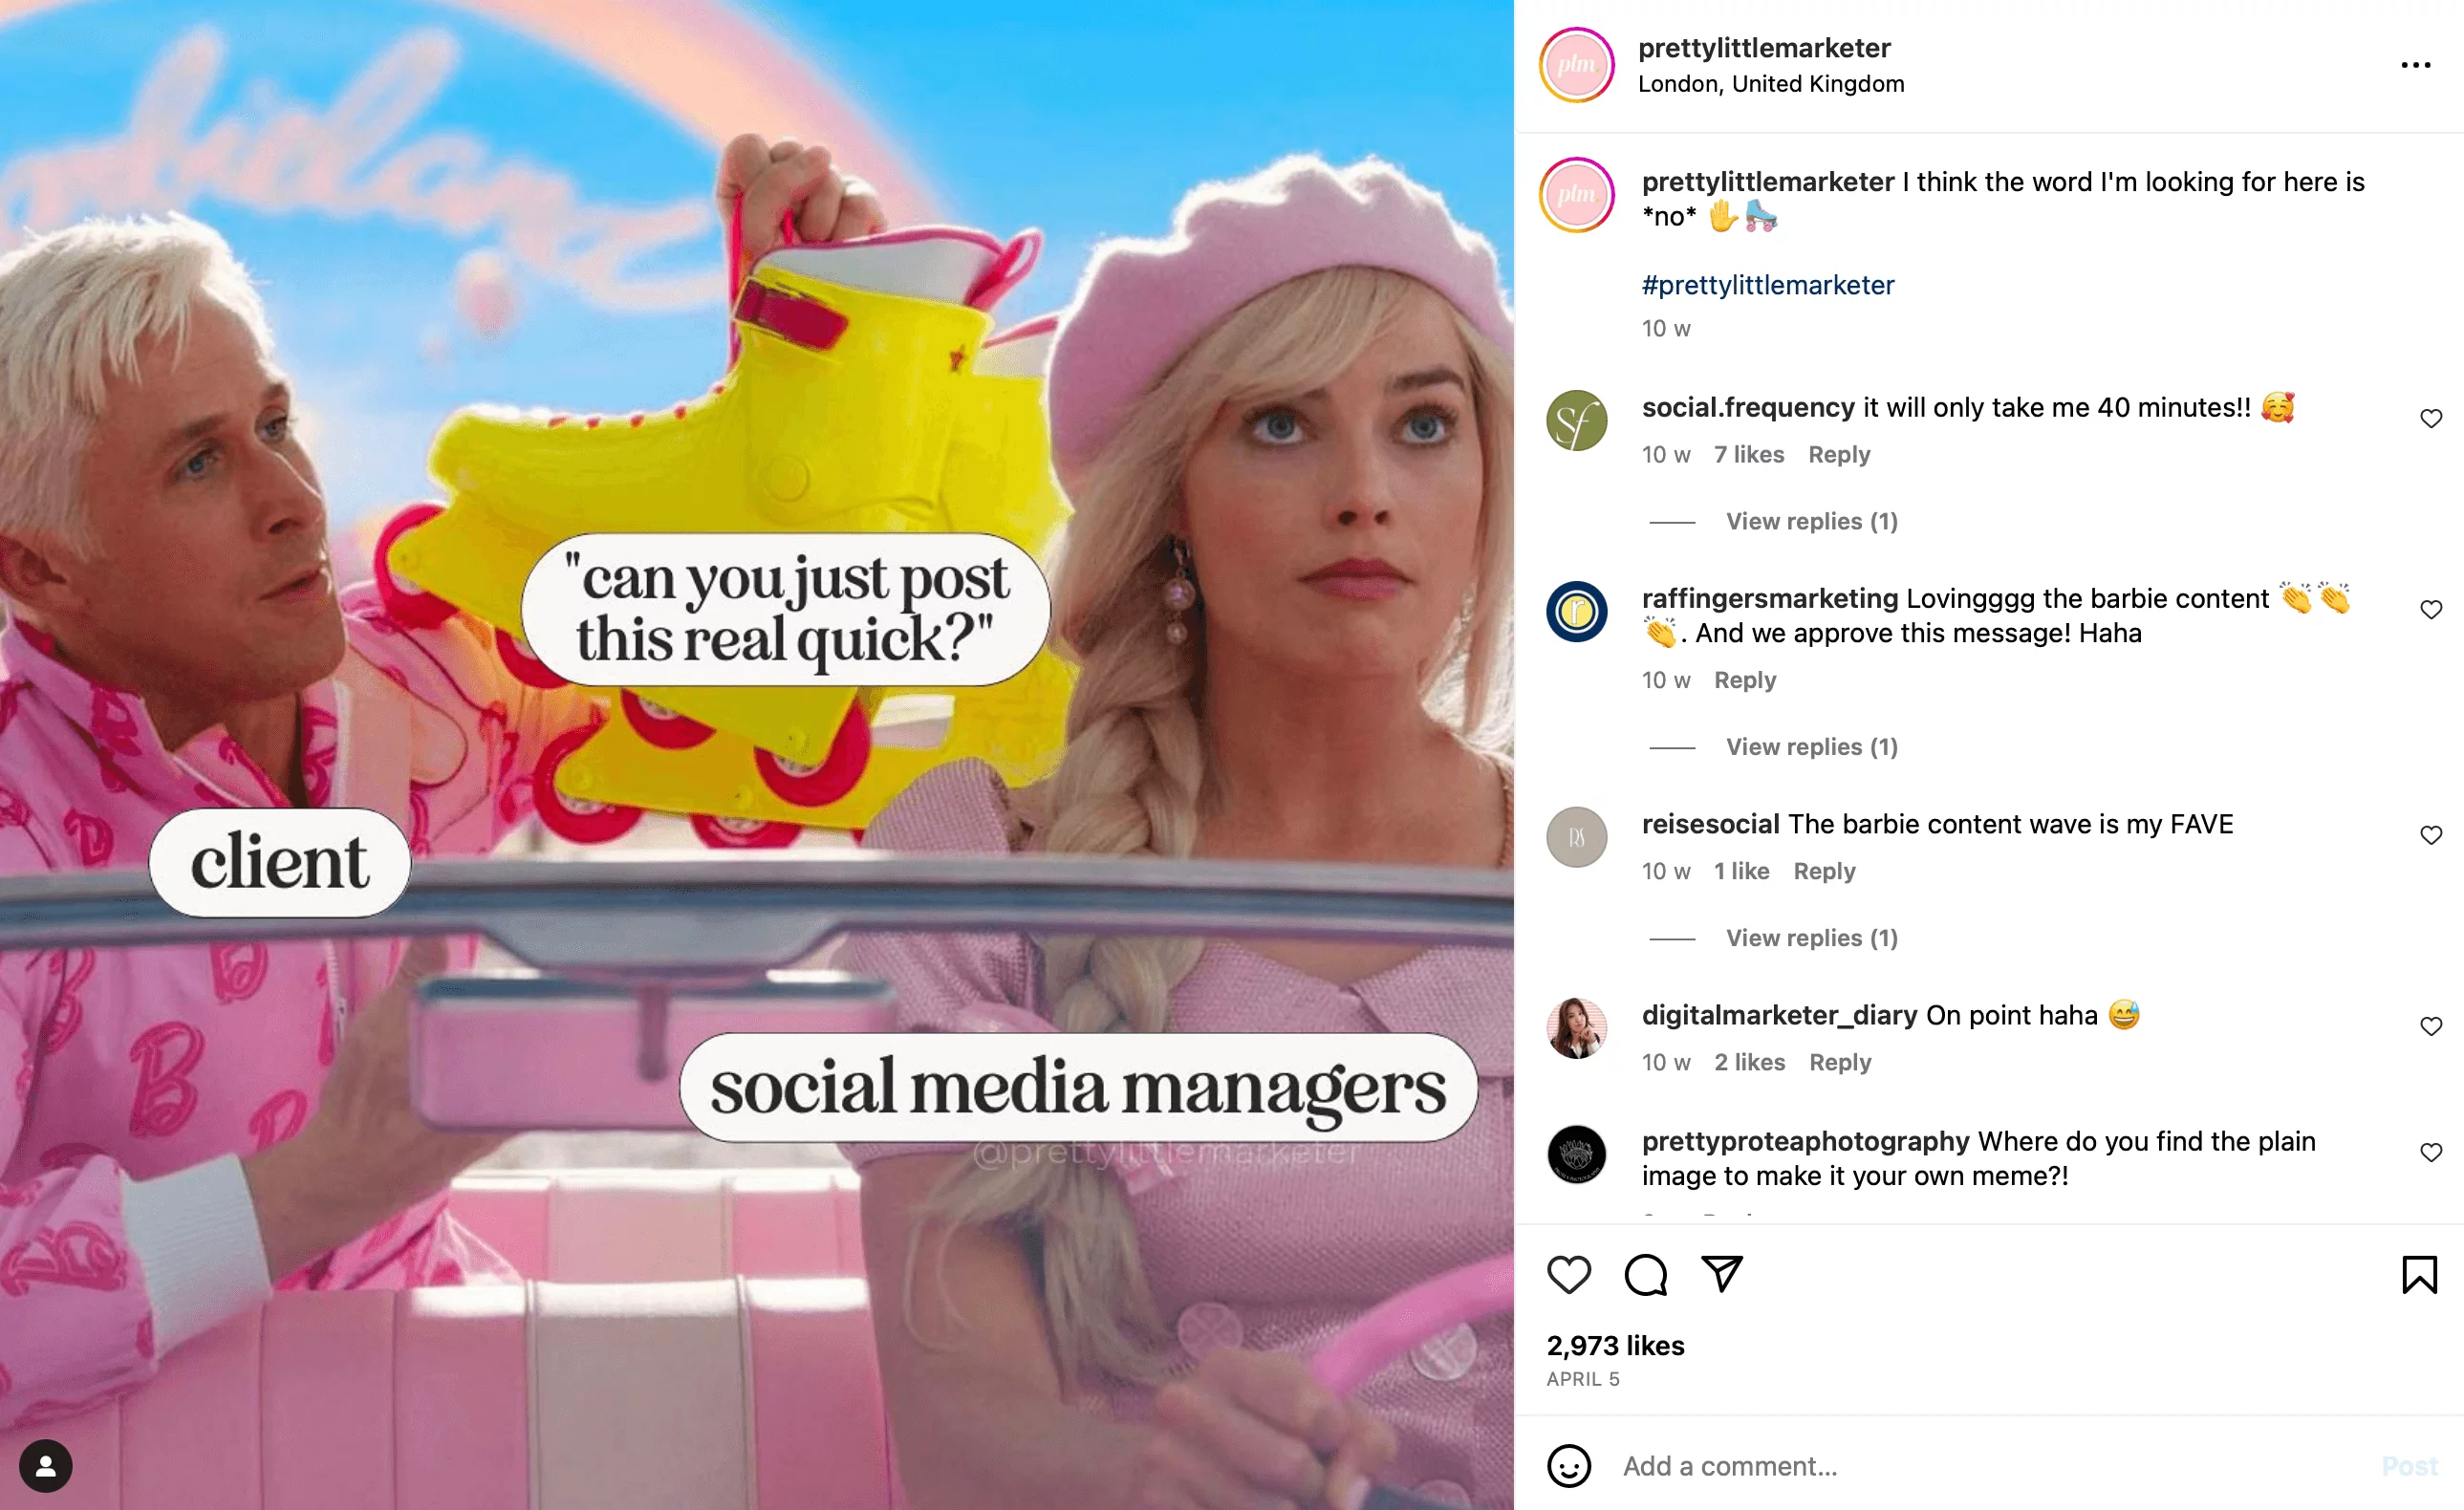 Instagram meme from @prettylittlemarketer depicting a Barbie movie inspired joke about a client asking the social media manager to just post something real quick.